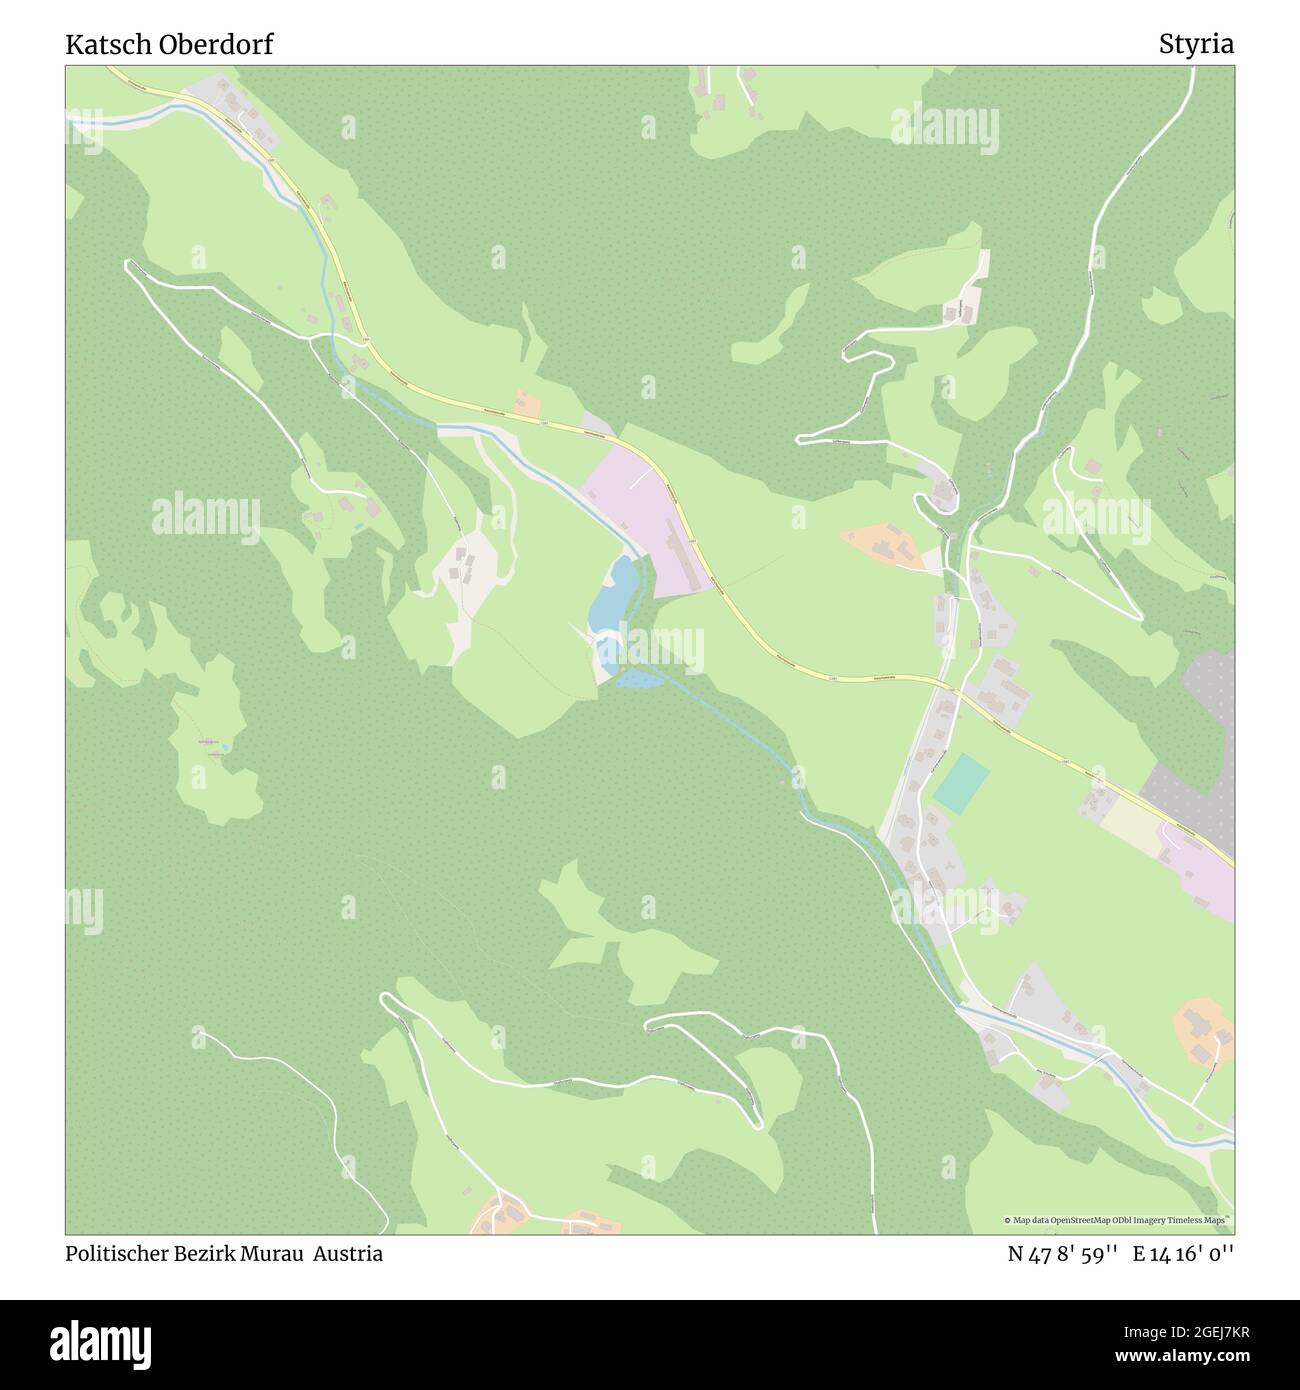 Katsch Oberdorf, Politischer Bezirk Murau, Austria, Styria, N 47 8' 59'', E 14 16' 0'', map, Timeless Map published in 2021. Travelers, explorers and adventurers like Florence Nightingale, David Livingstone, Ernest Shackleton, Lewis and Clark and Sherlock Holmes relied on maps to plan travels to the world's most remote corners, Timeless Maps is mapping most locations on the globe, showing the achievement of great dreams Stock Photo